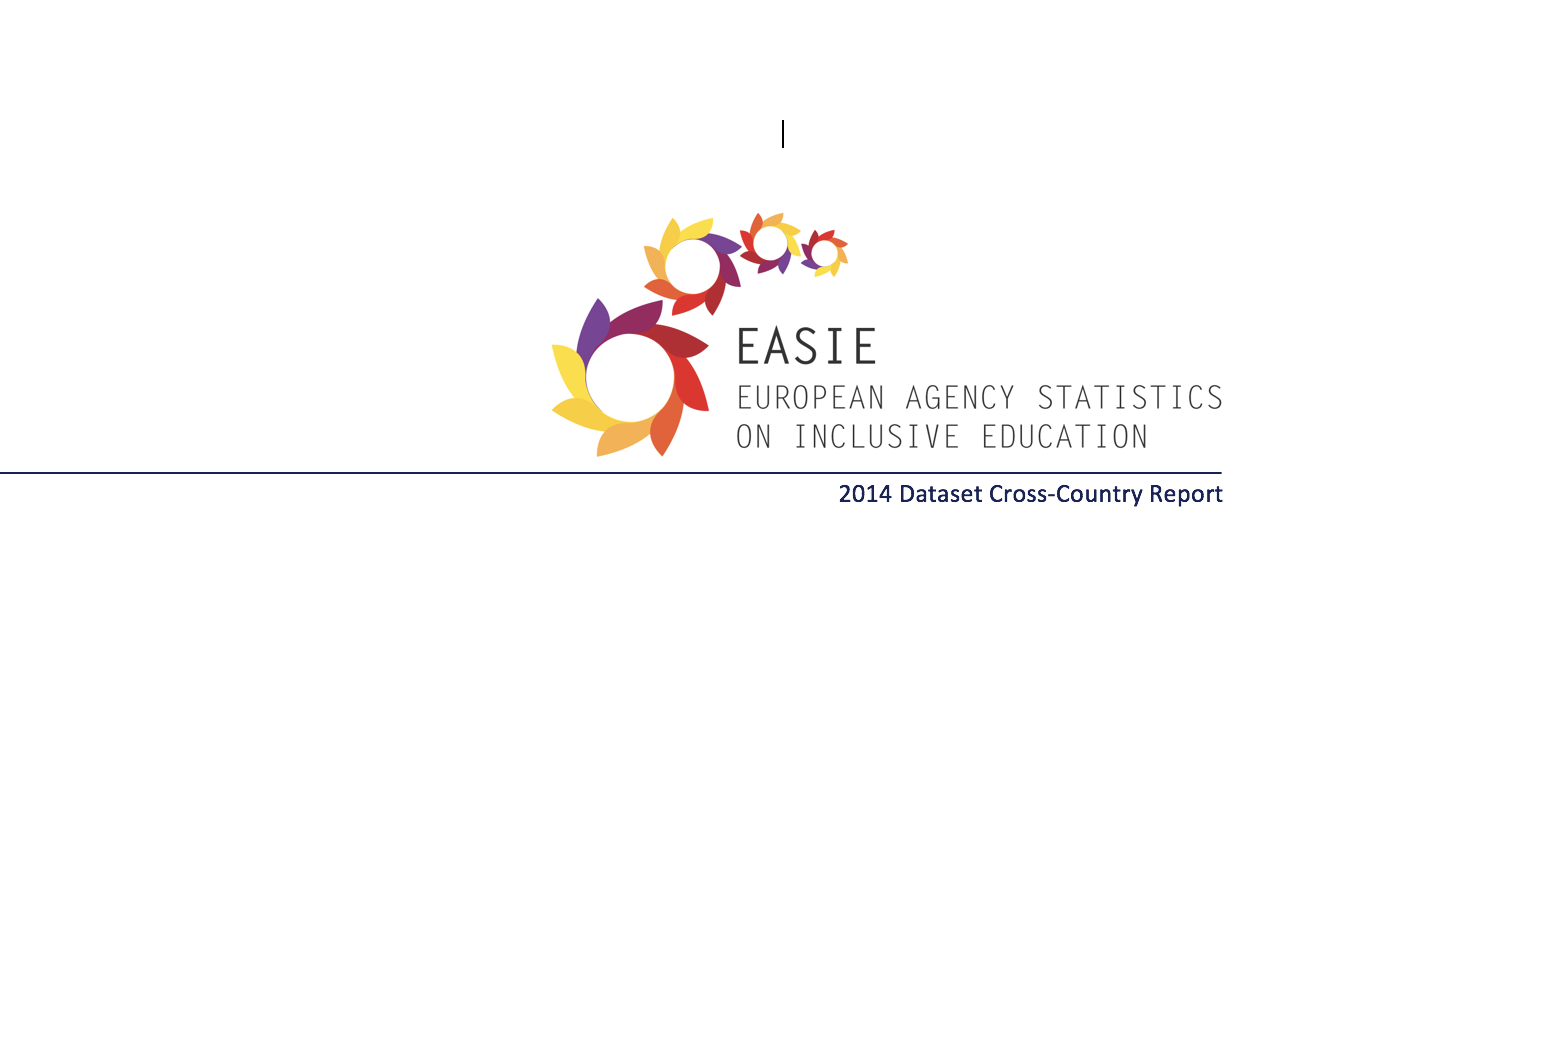 European Agency Statistics on Inclusive Education: 2014 Dataset Cross-Country Report